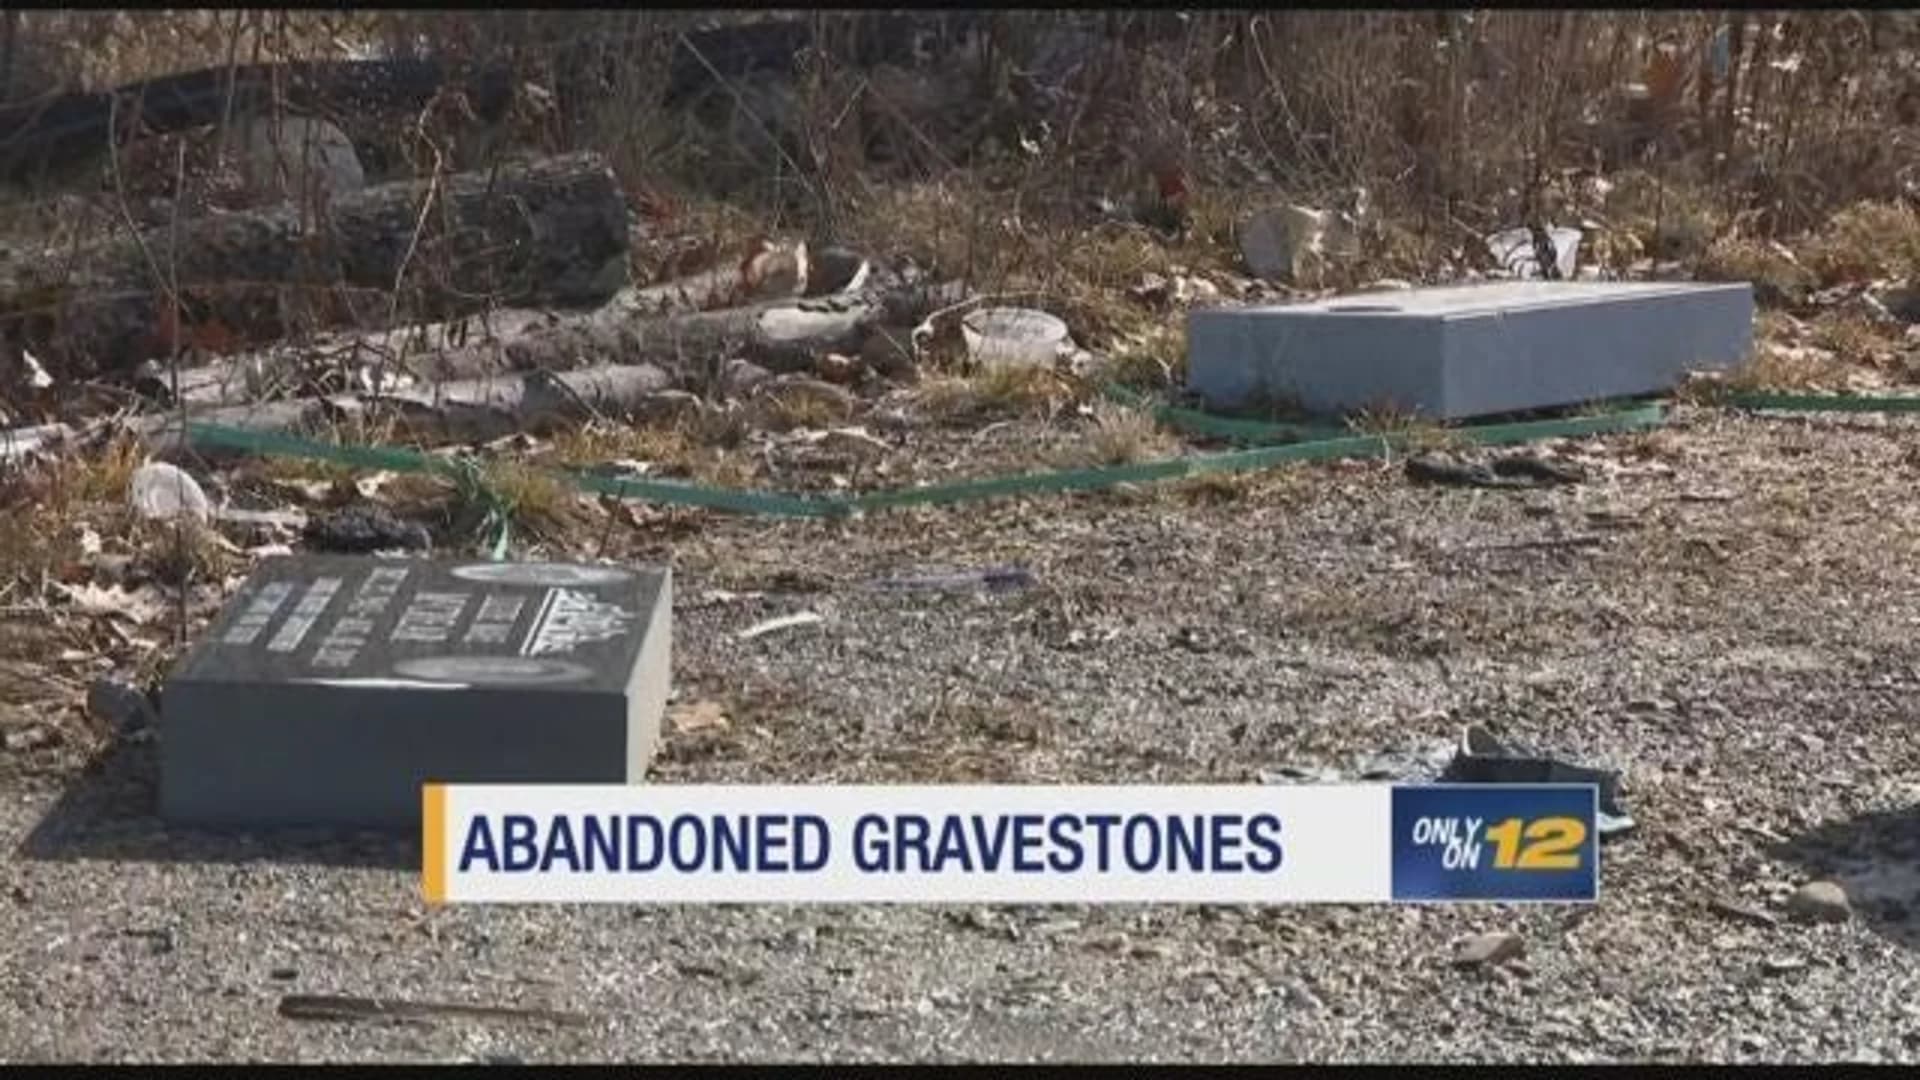 Gravestones found abandoned at NYC Parks Department property